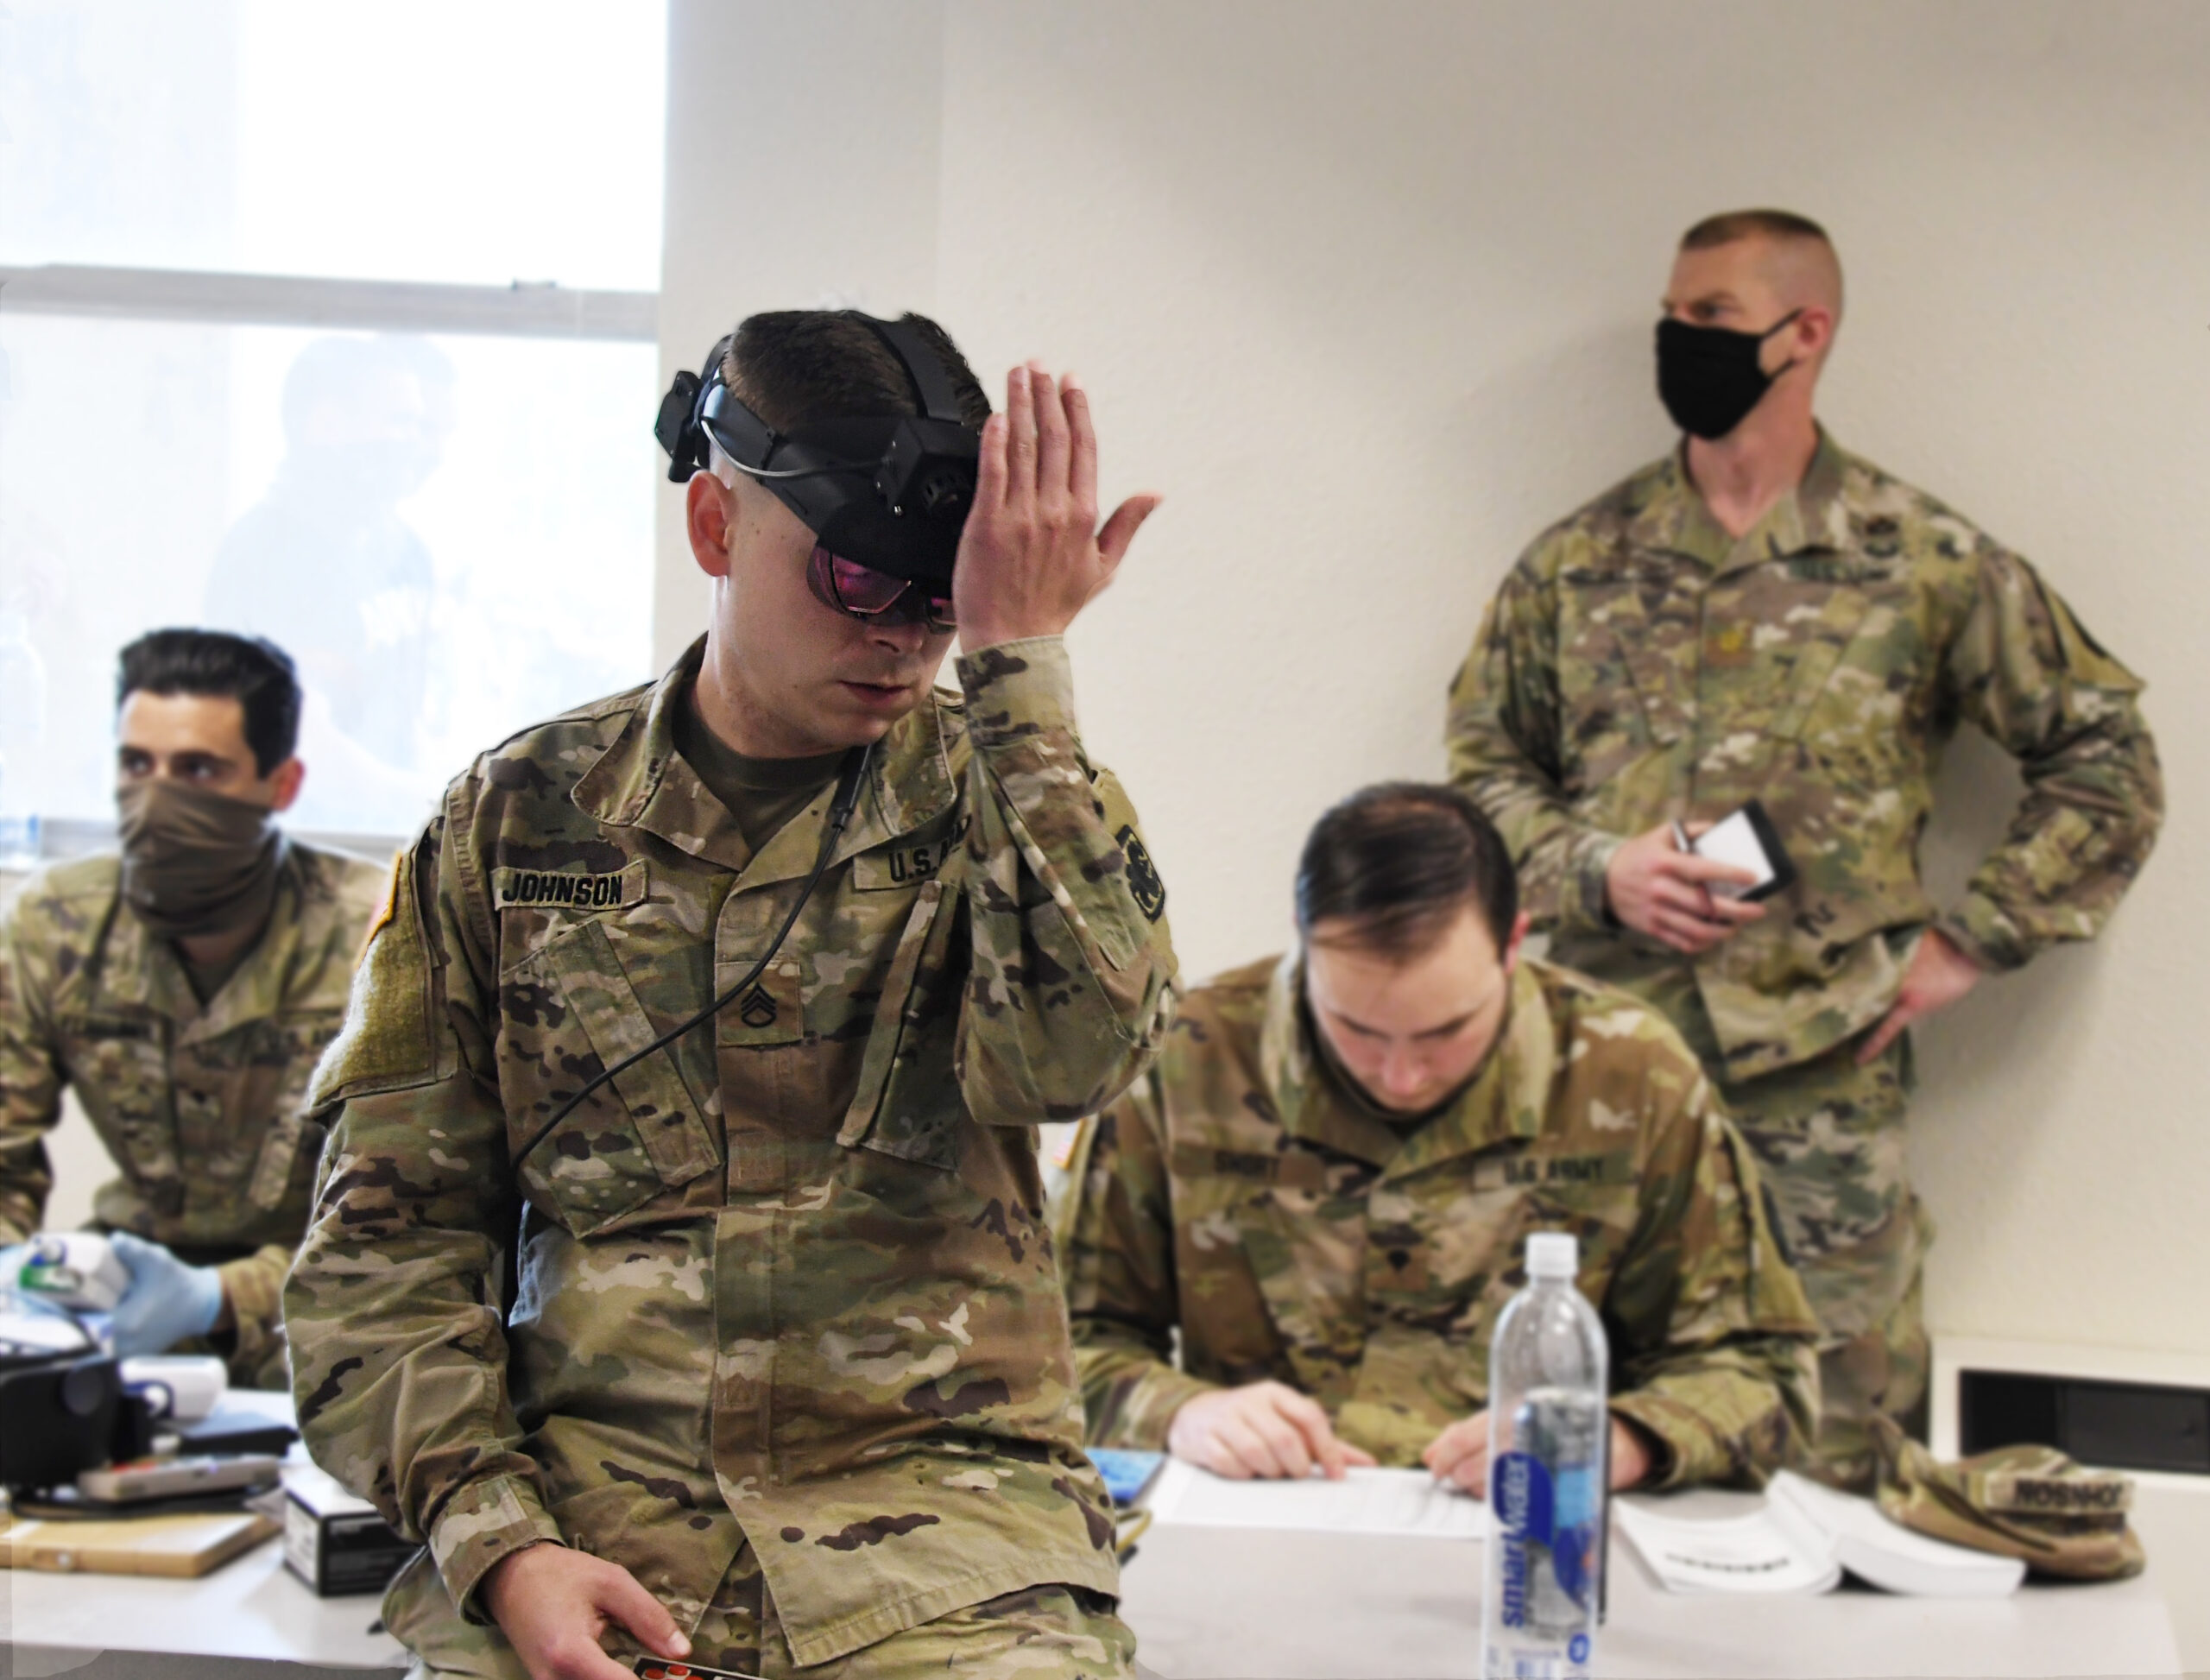 COVID-19: Army IVAS Goggles Now Take Temperatures